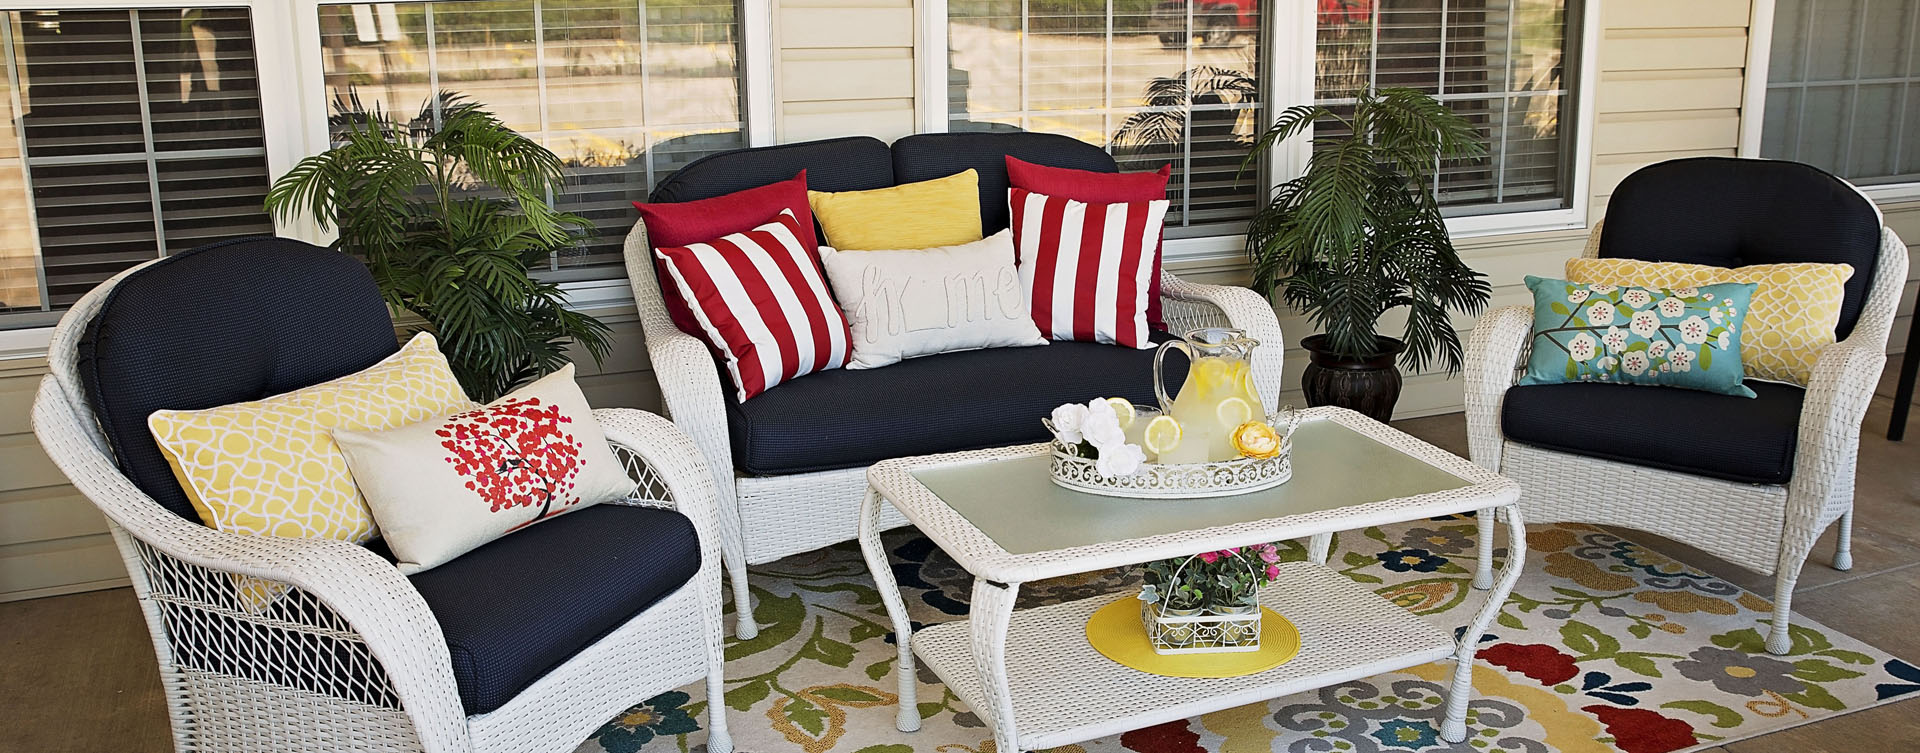 Relax in your favorite chair on the porch at Bickford of Grand Island